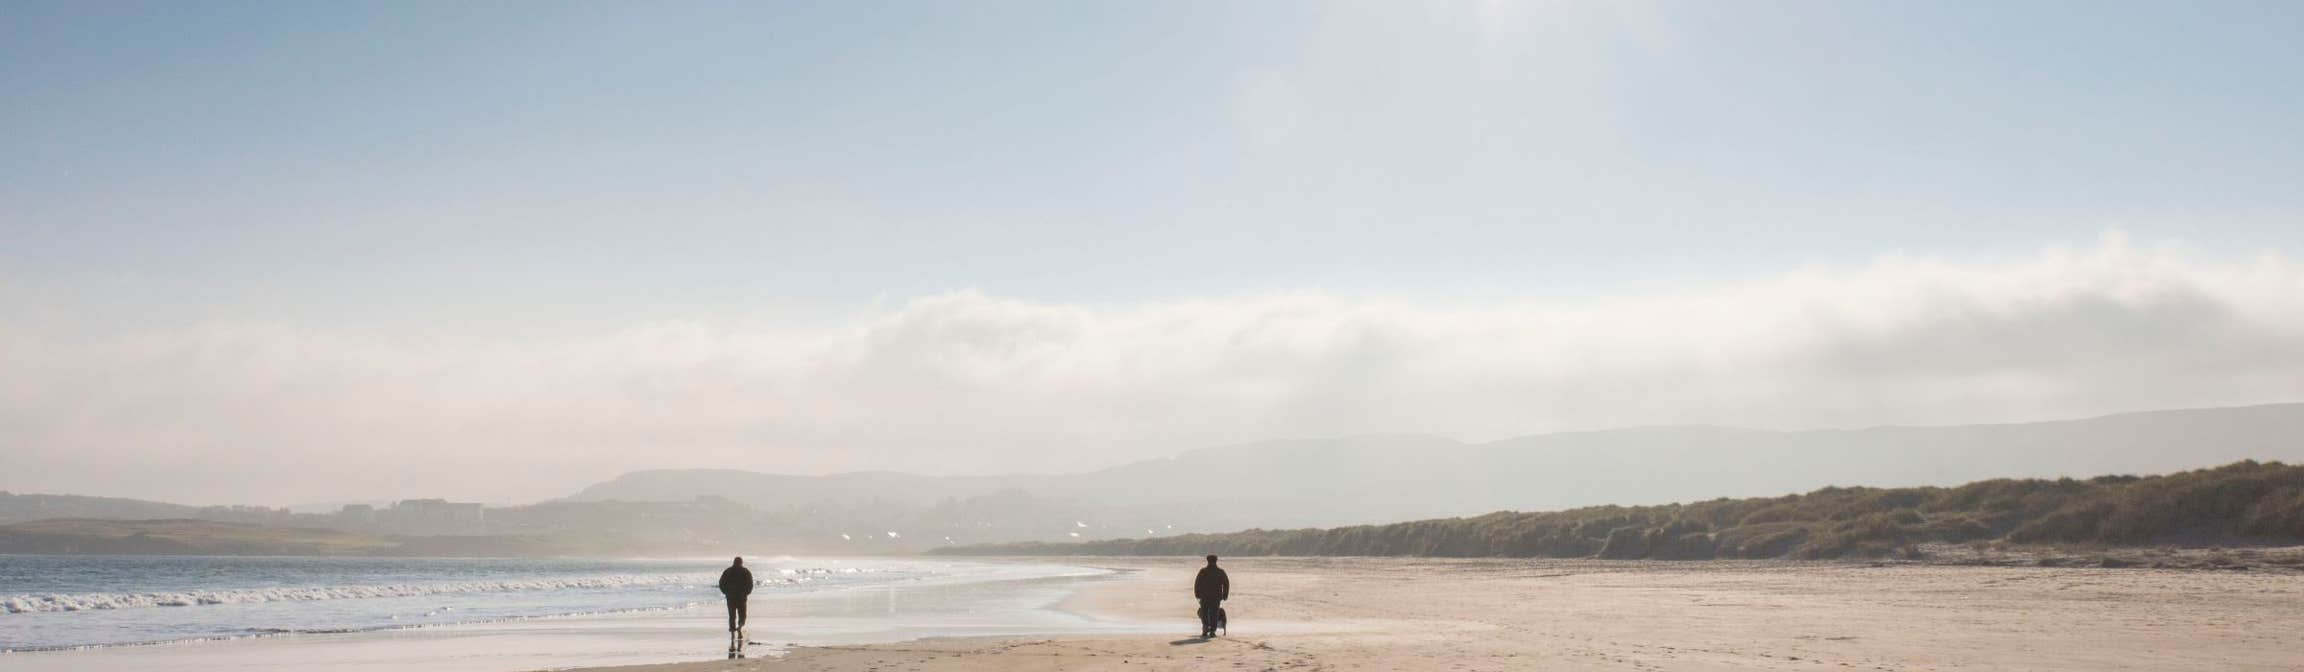 Image of walkers on the beach in Dunfanaghy in County Donegal